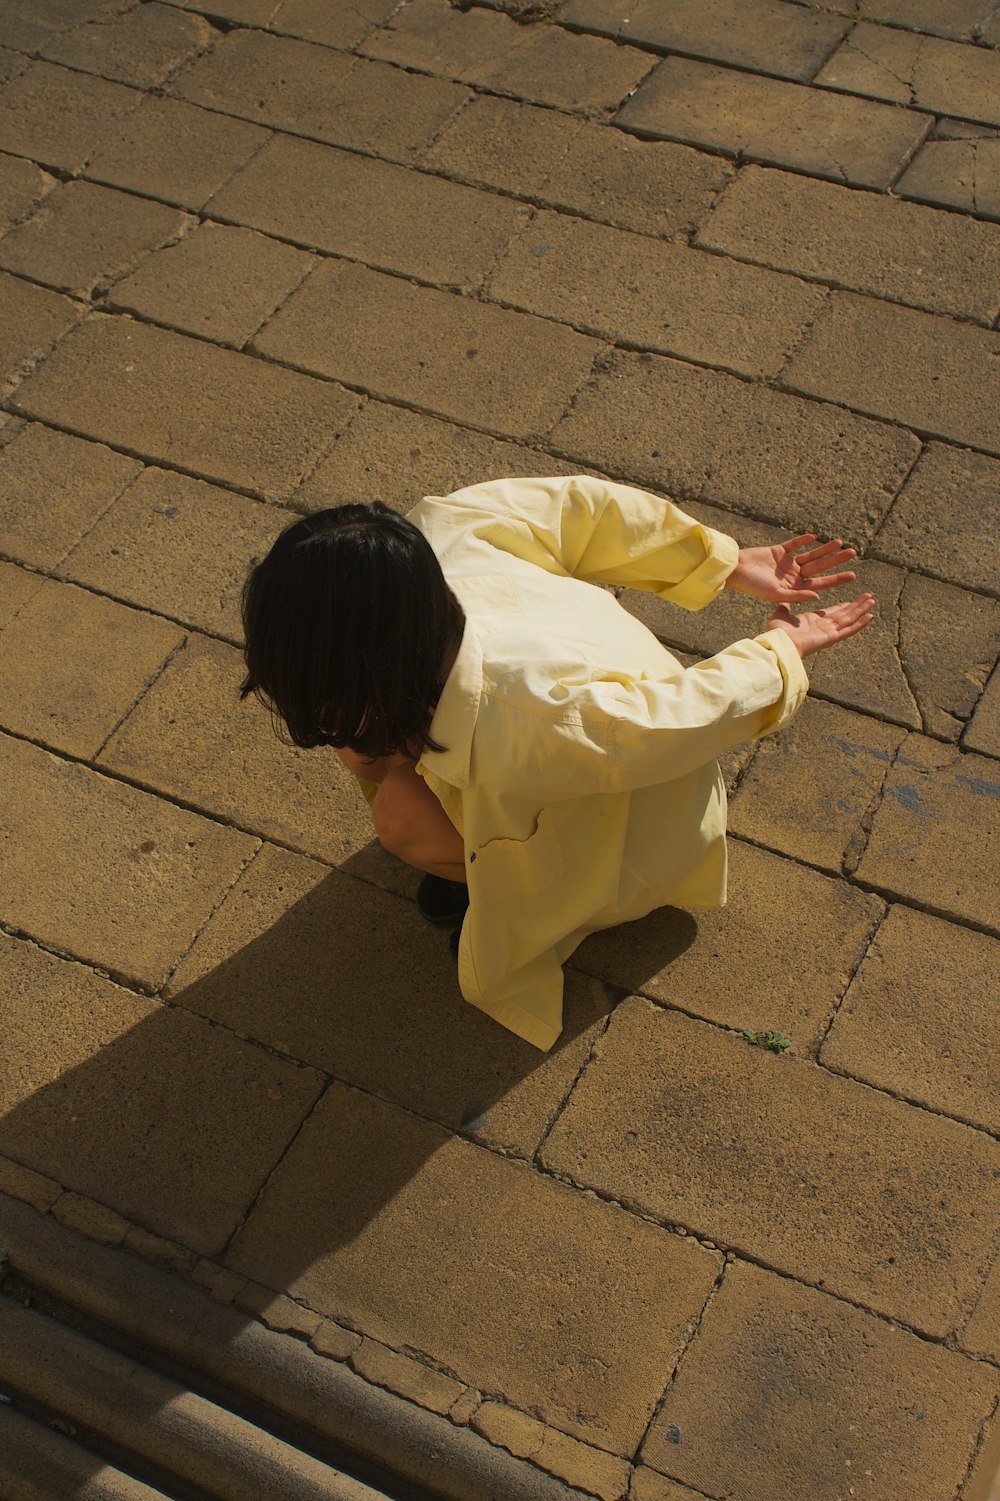 a young boy in a yellow shirt is on the ground